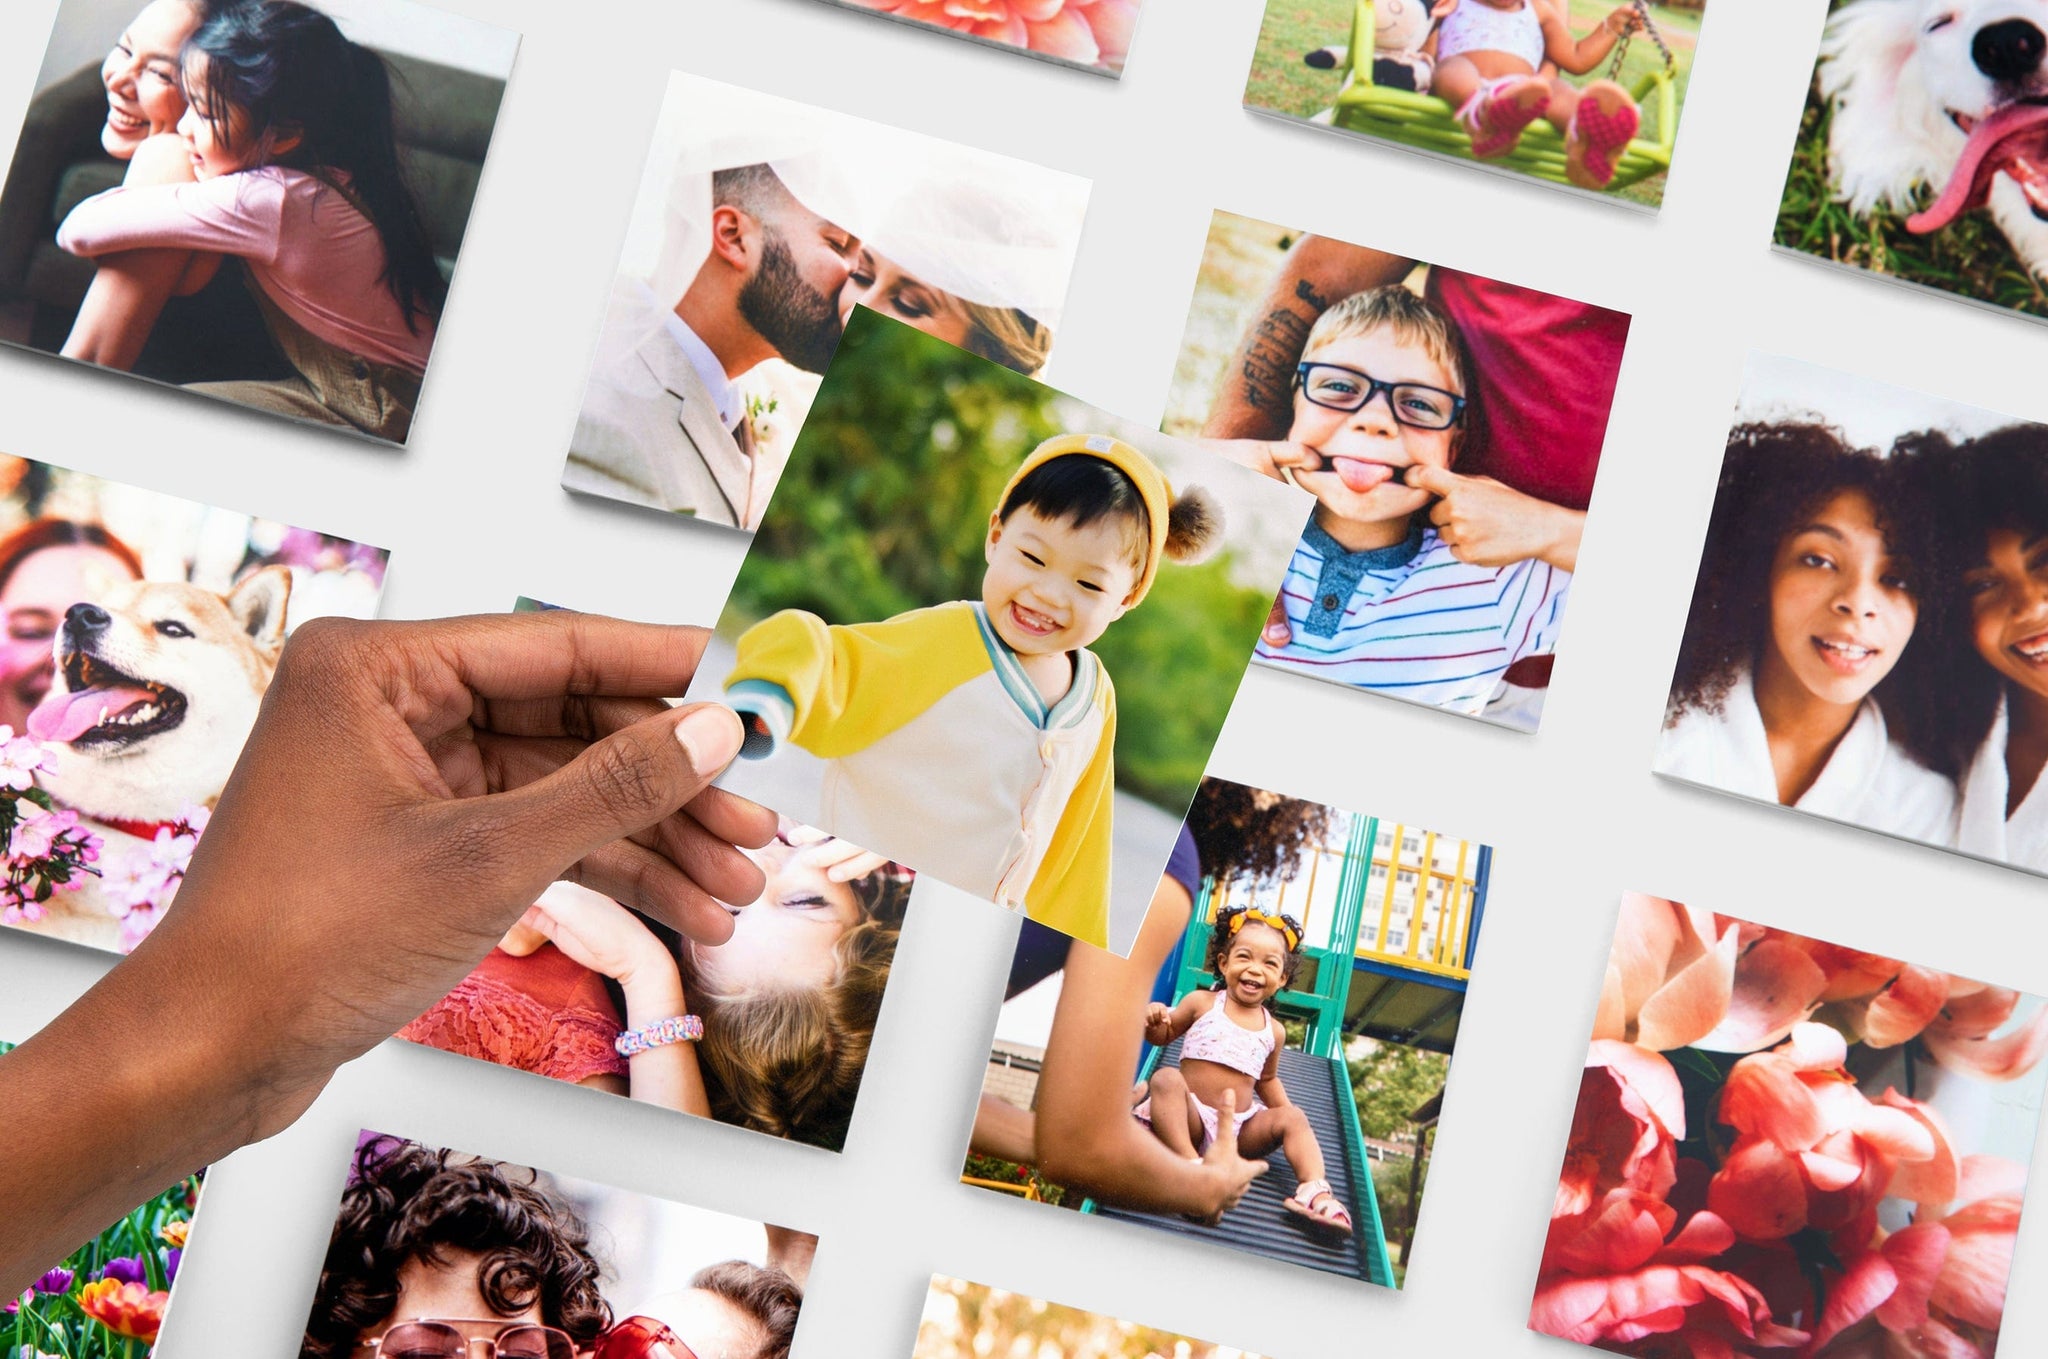 Flat lay of multiple square Photo Prints, the focus is a hand holding up a square Photo Print of a small child in a yellow hat.